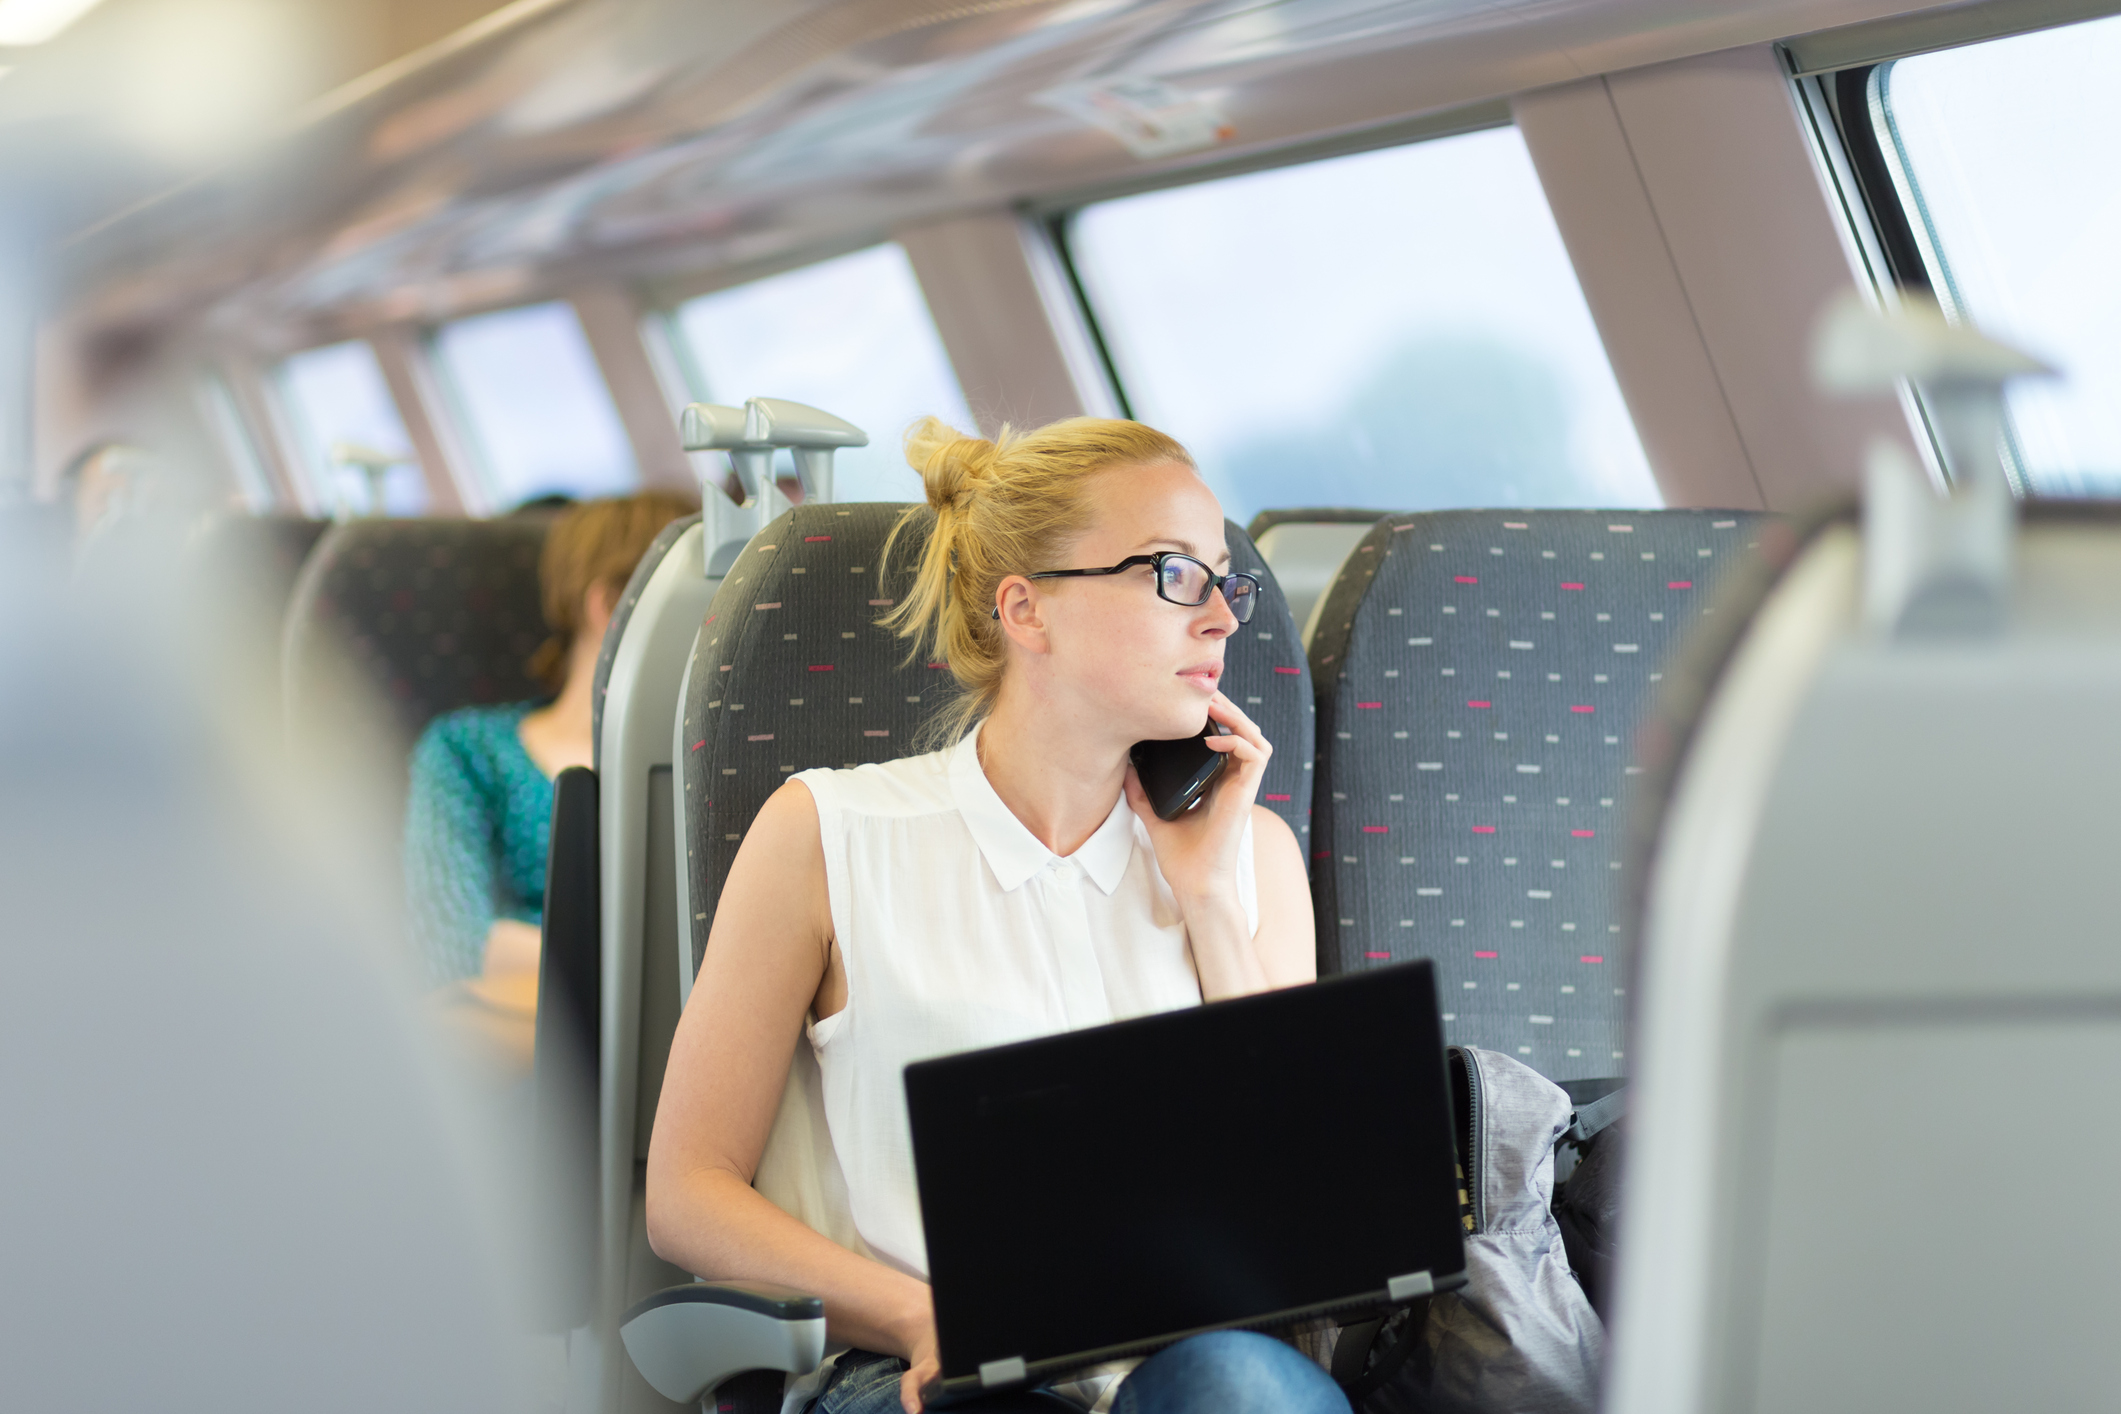 An image of a woman using her laptop and phone while seated on a train